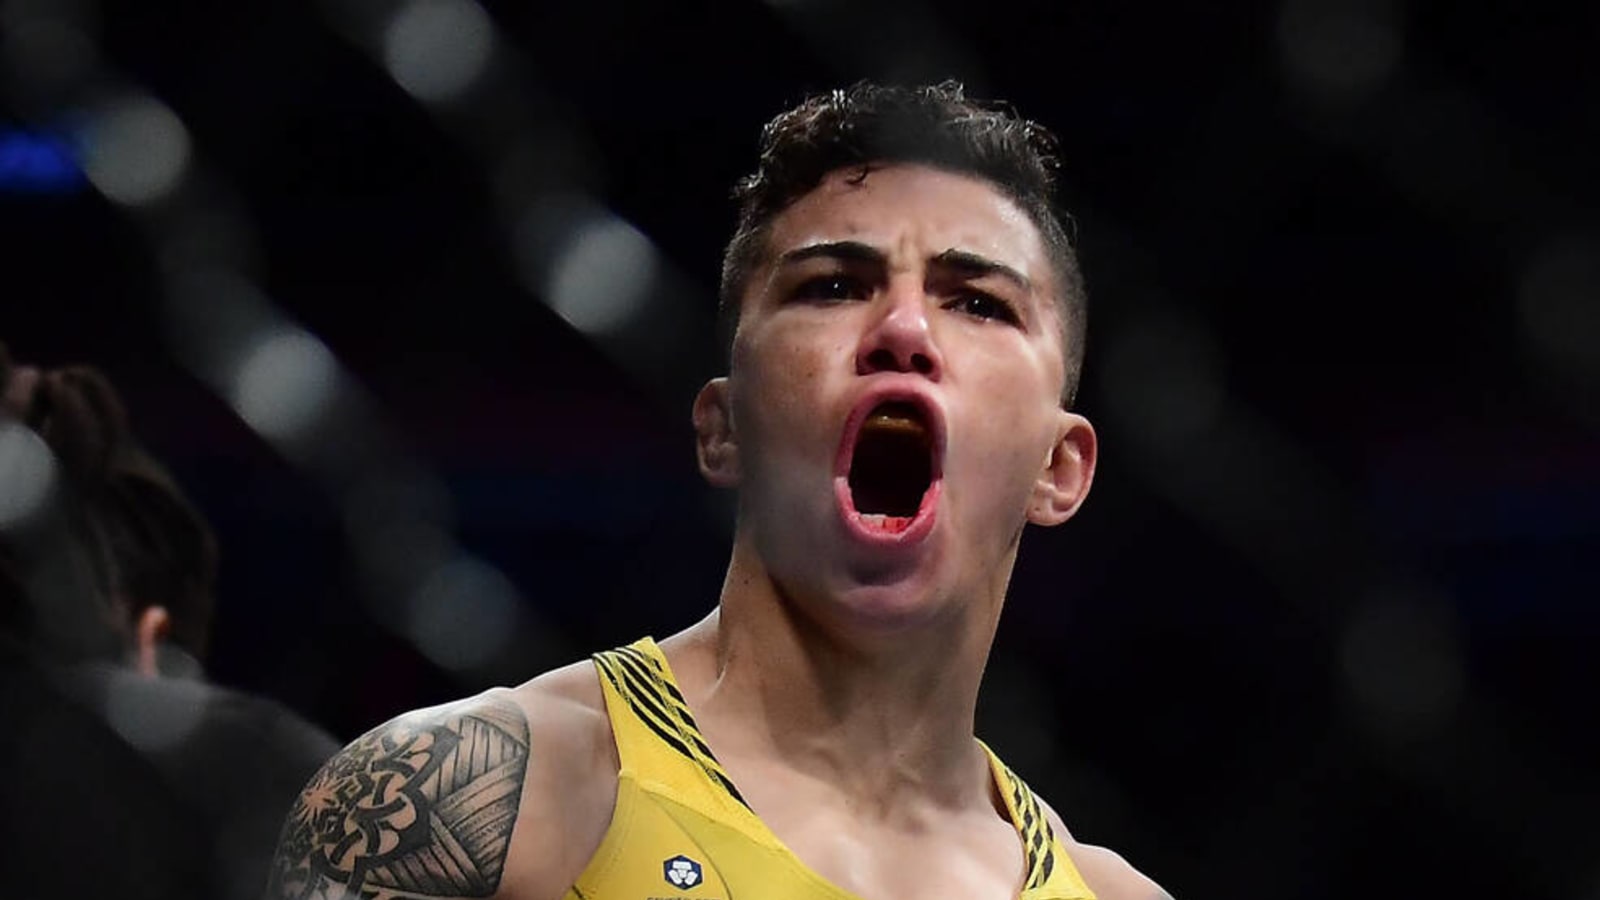 Trainer: Back injury forced Jessica Andrade to withdraw from UFC Paris